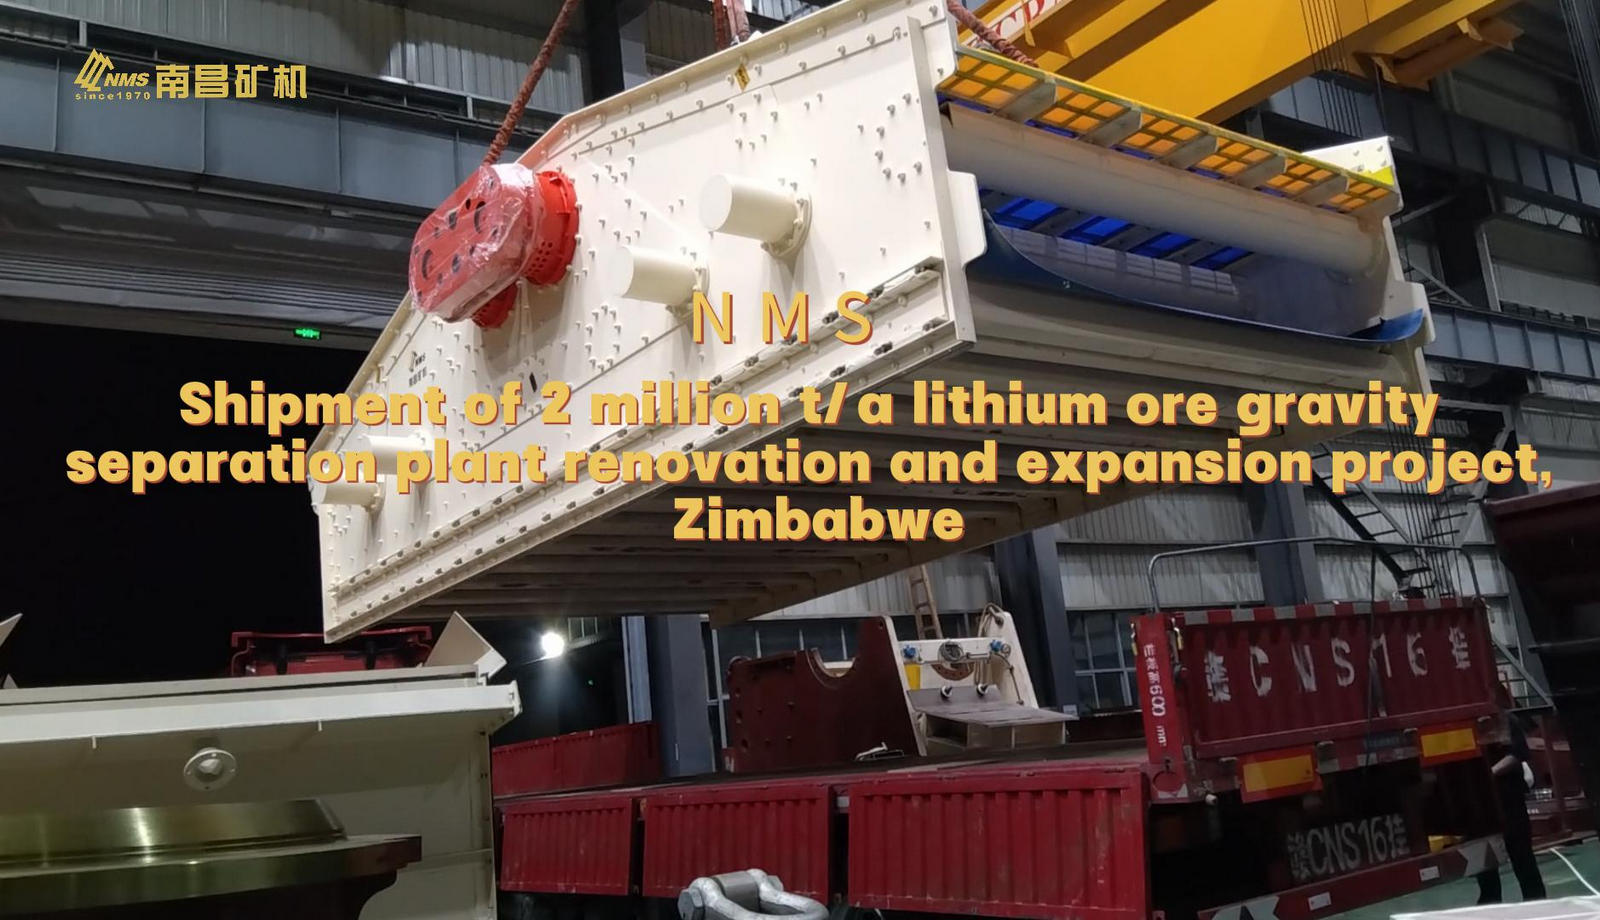 Shipment of 2 million t/a lithium ore gravity separation plant renovation and expansion project, Zimbabwe